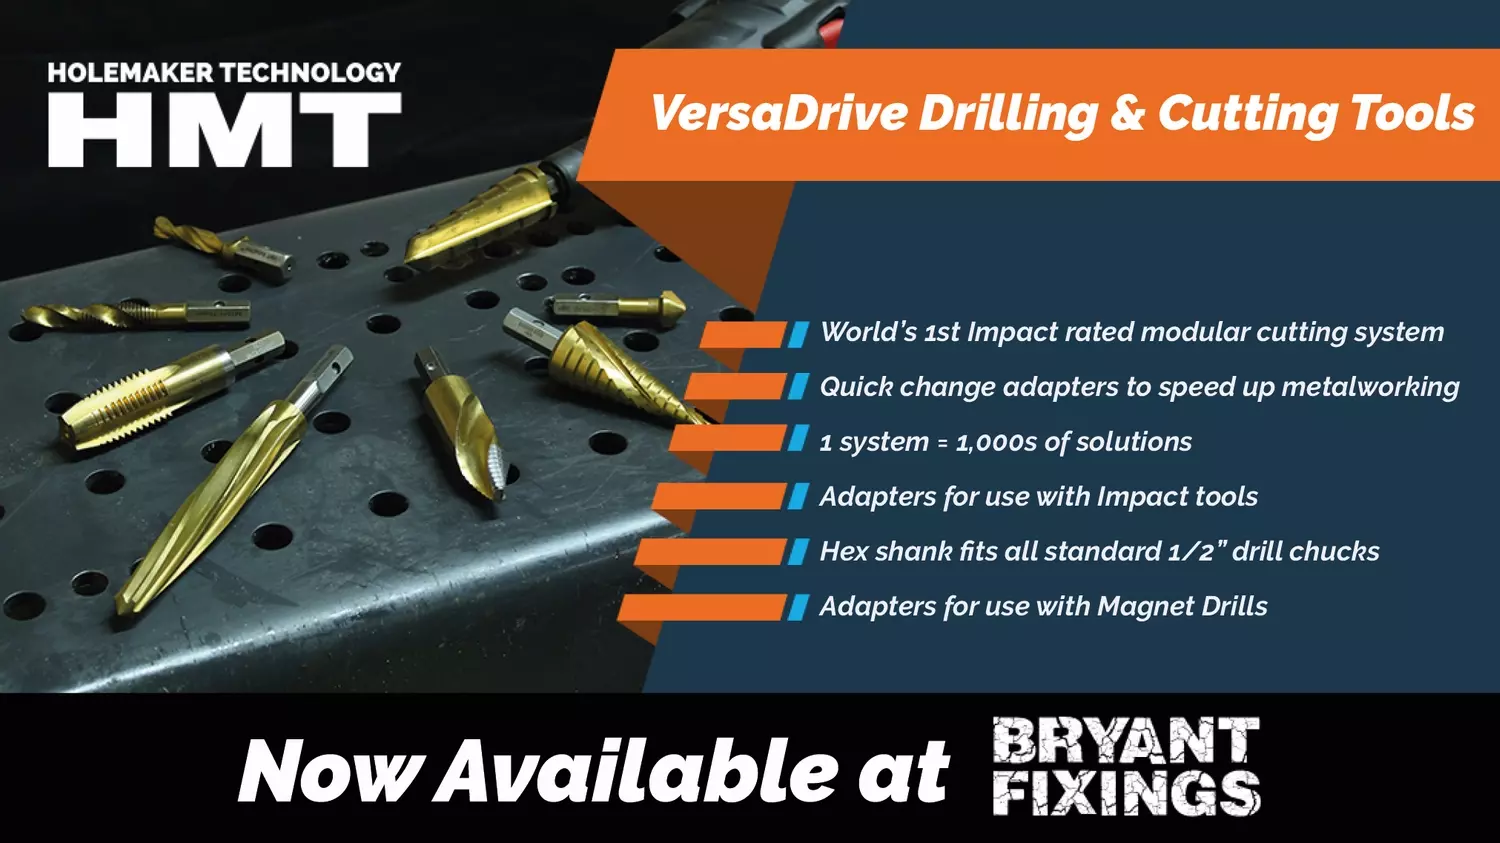 New products at Bryant Fixings